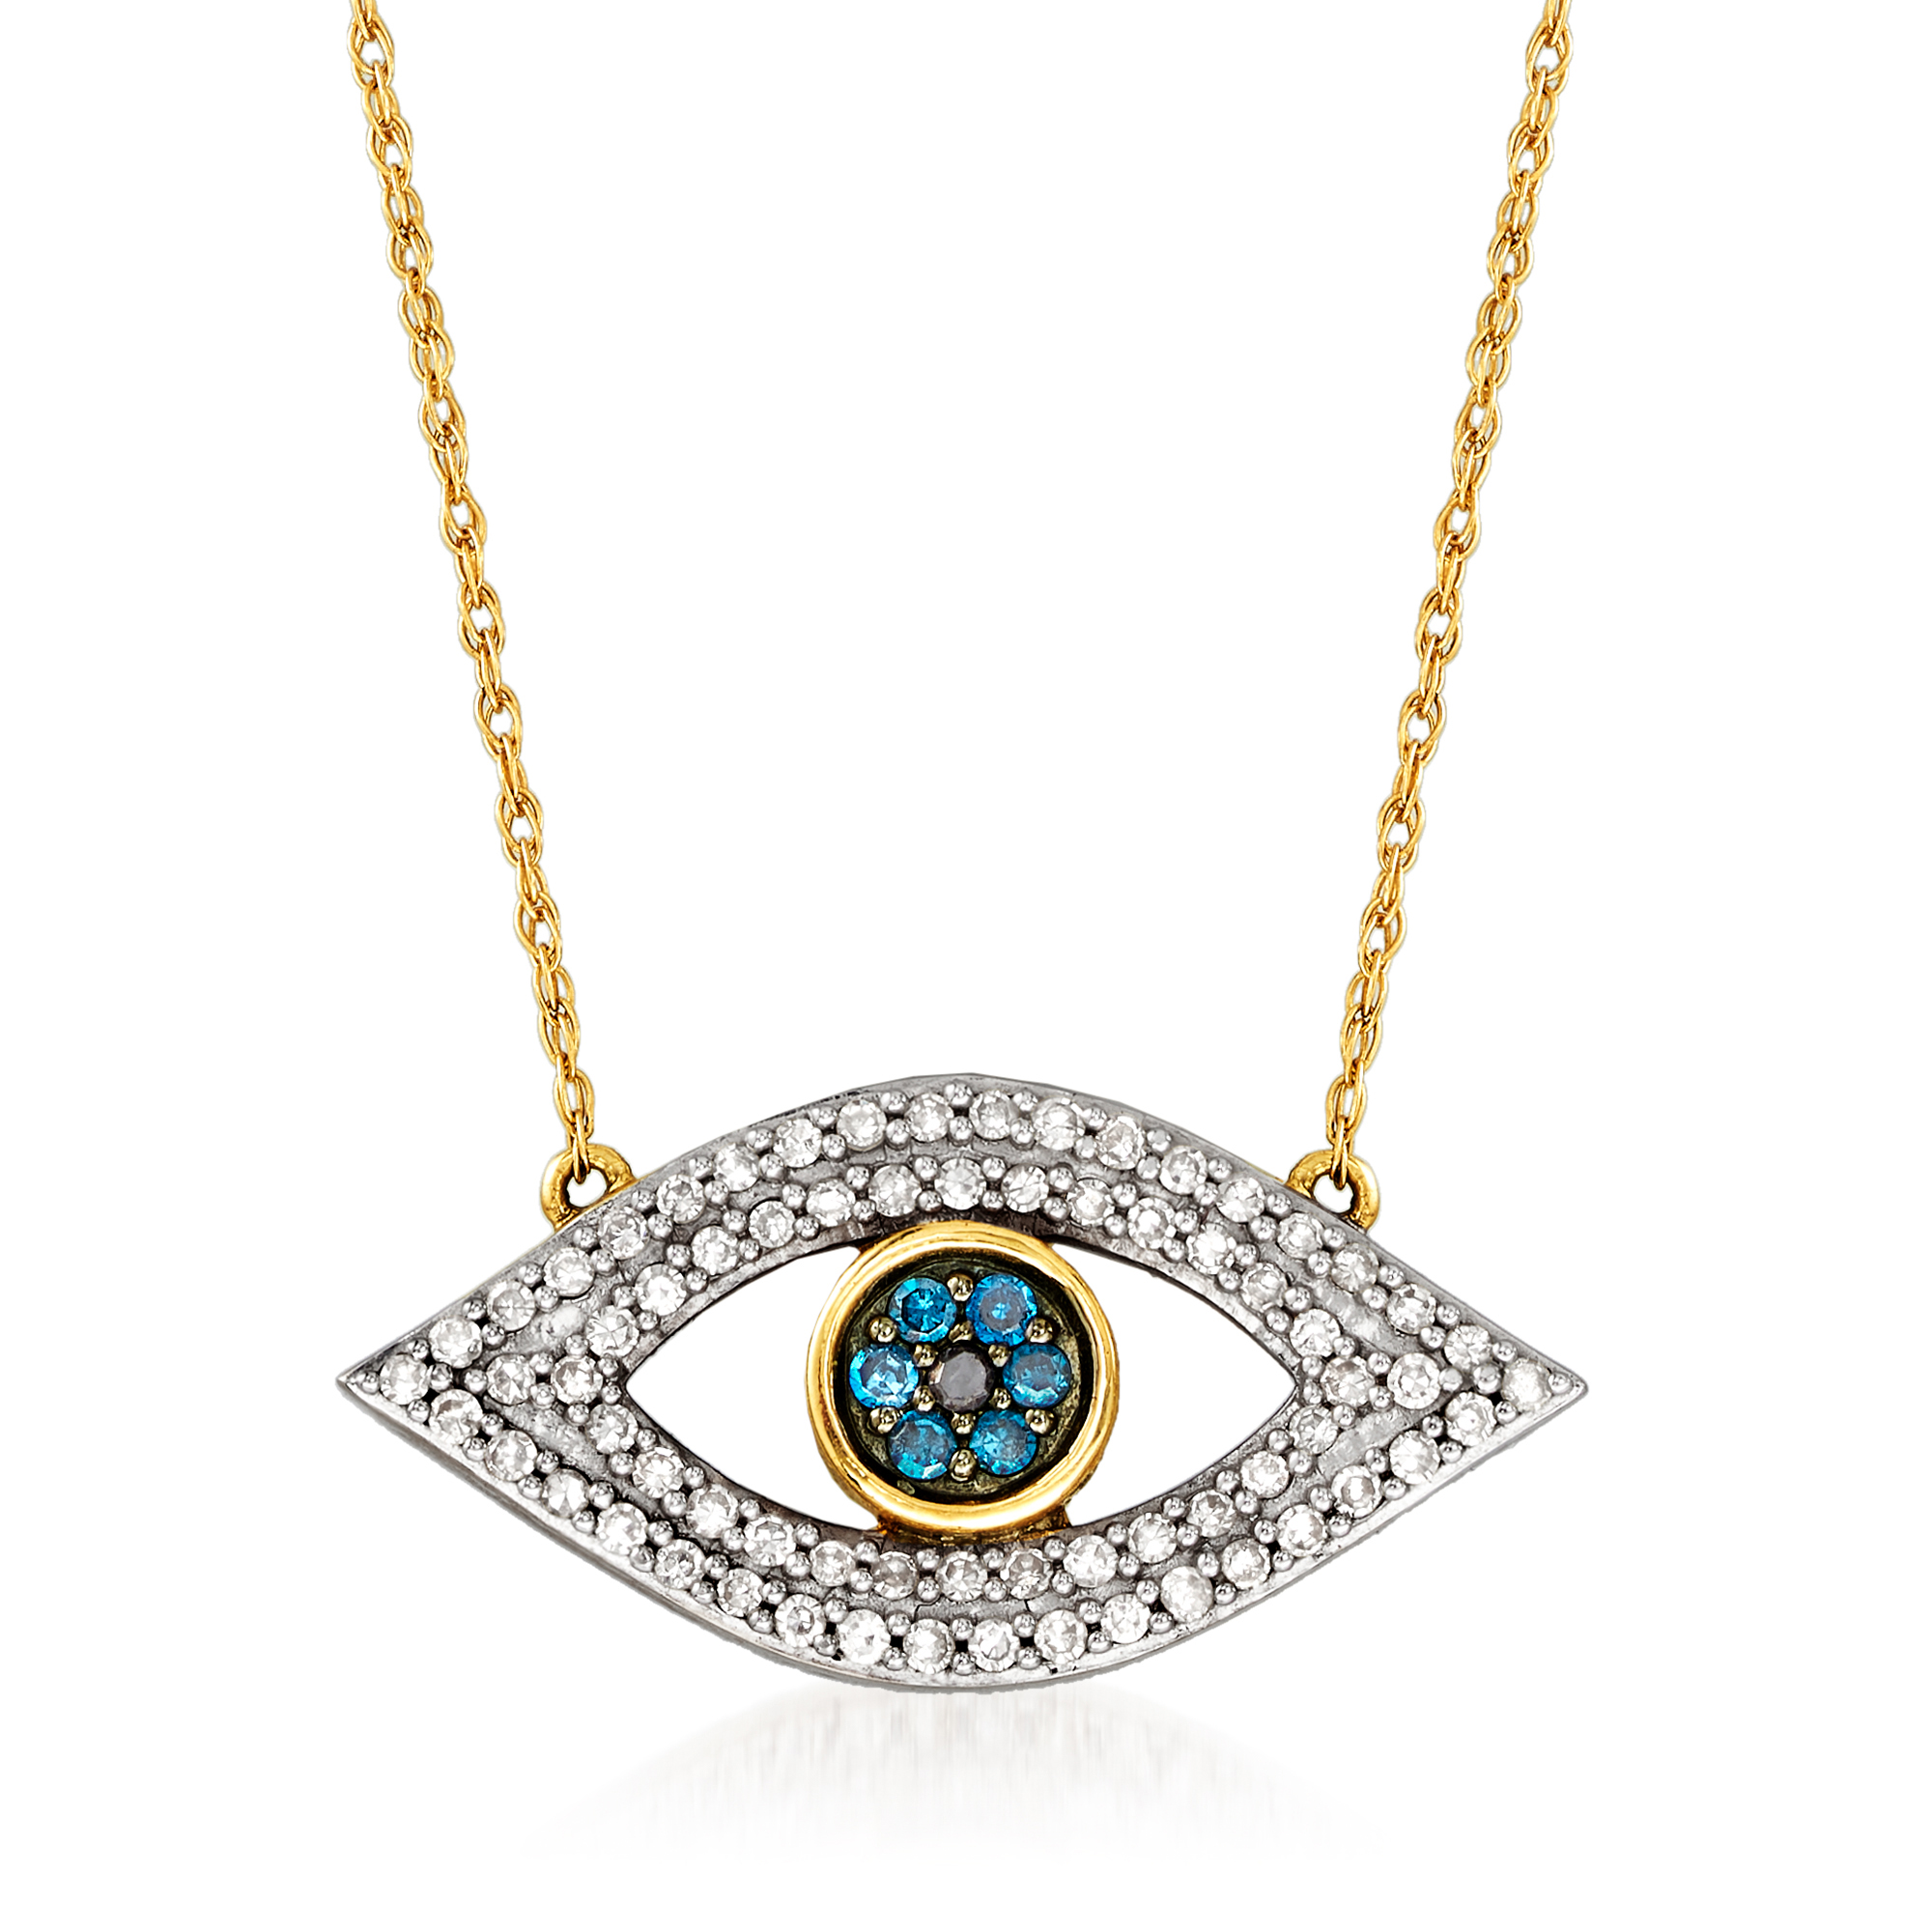 25 ct. t.w. Multicolored Diamond Evil Eye Necklace in 14kt Yellow 